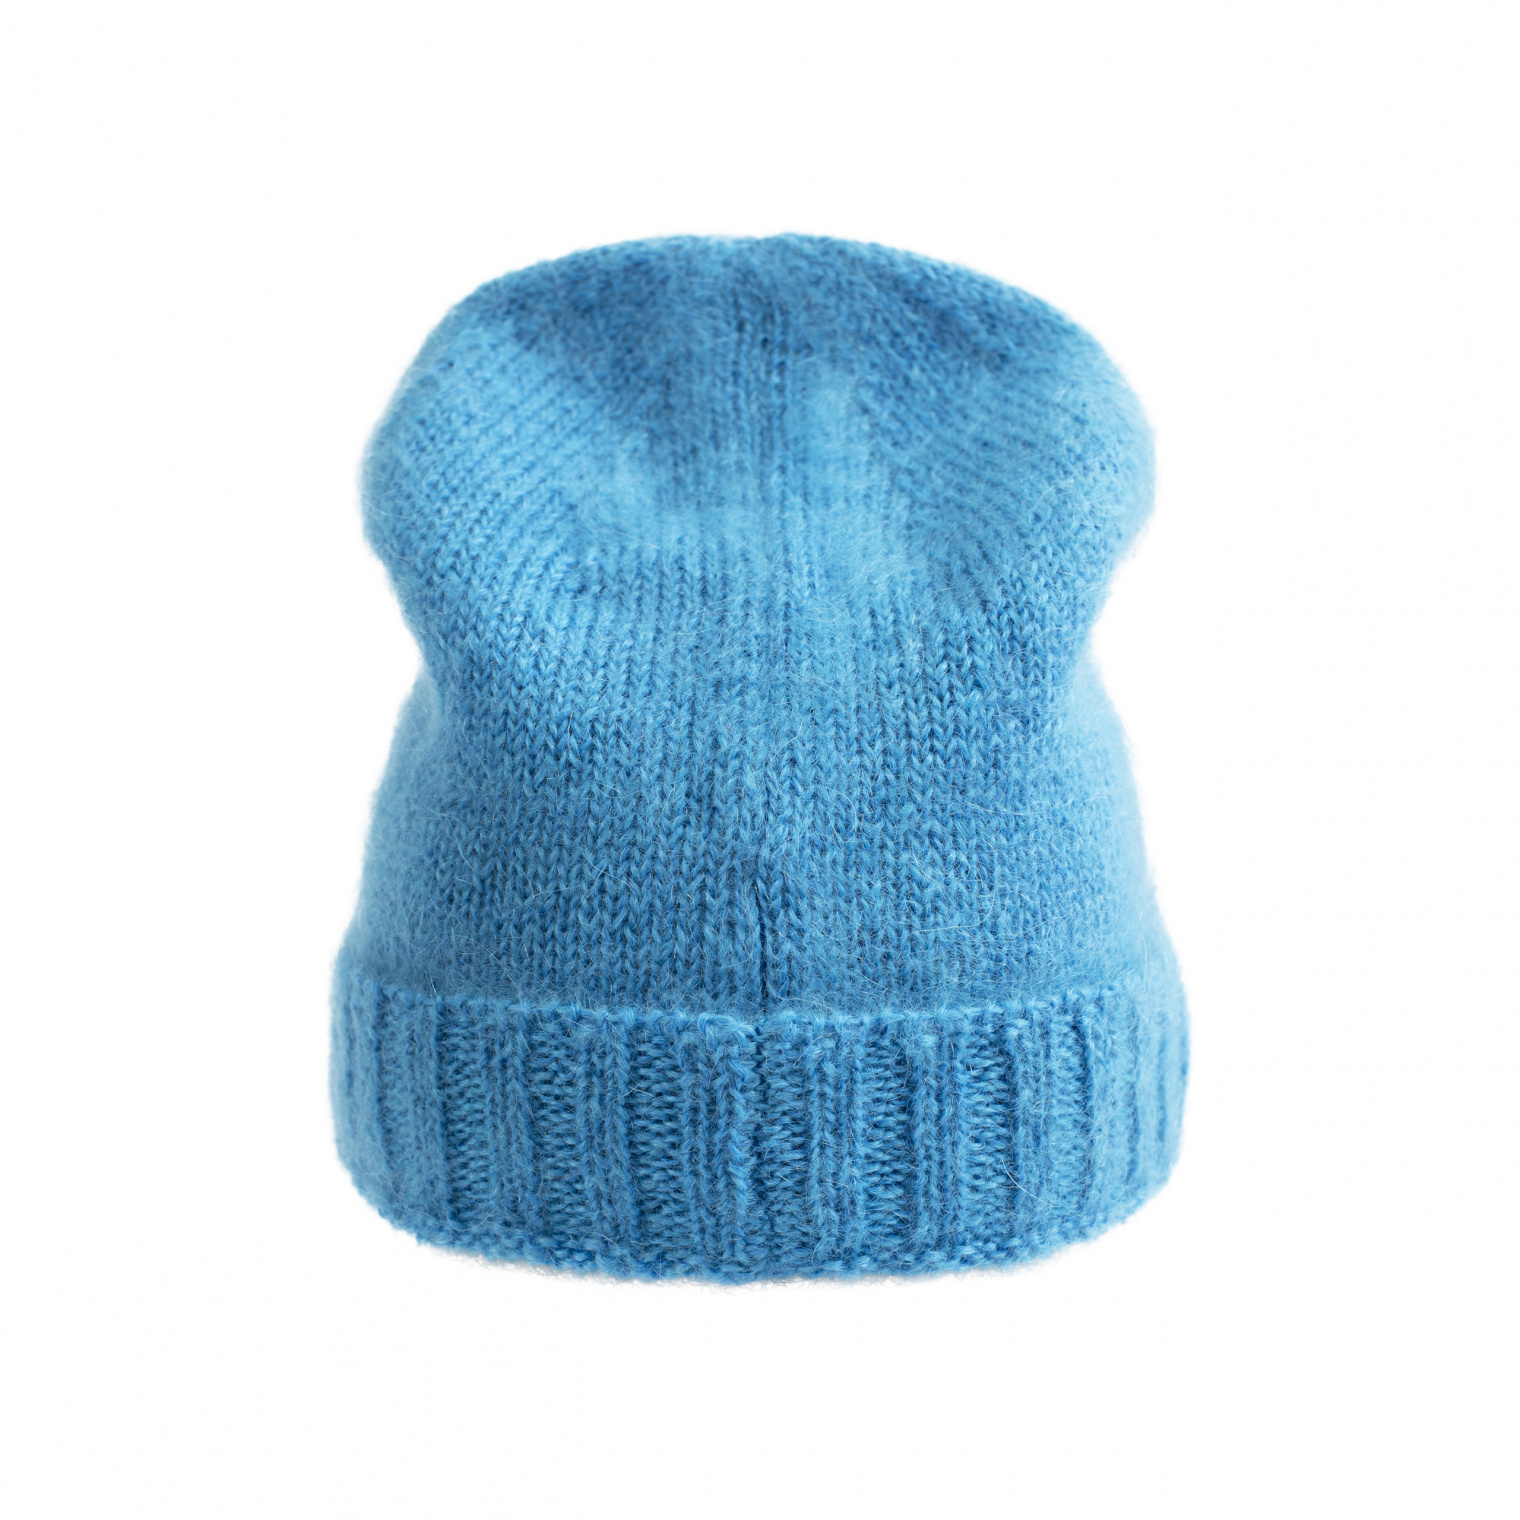 Raf Simons RS Knitted Beanie in blue